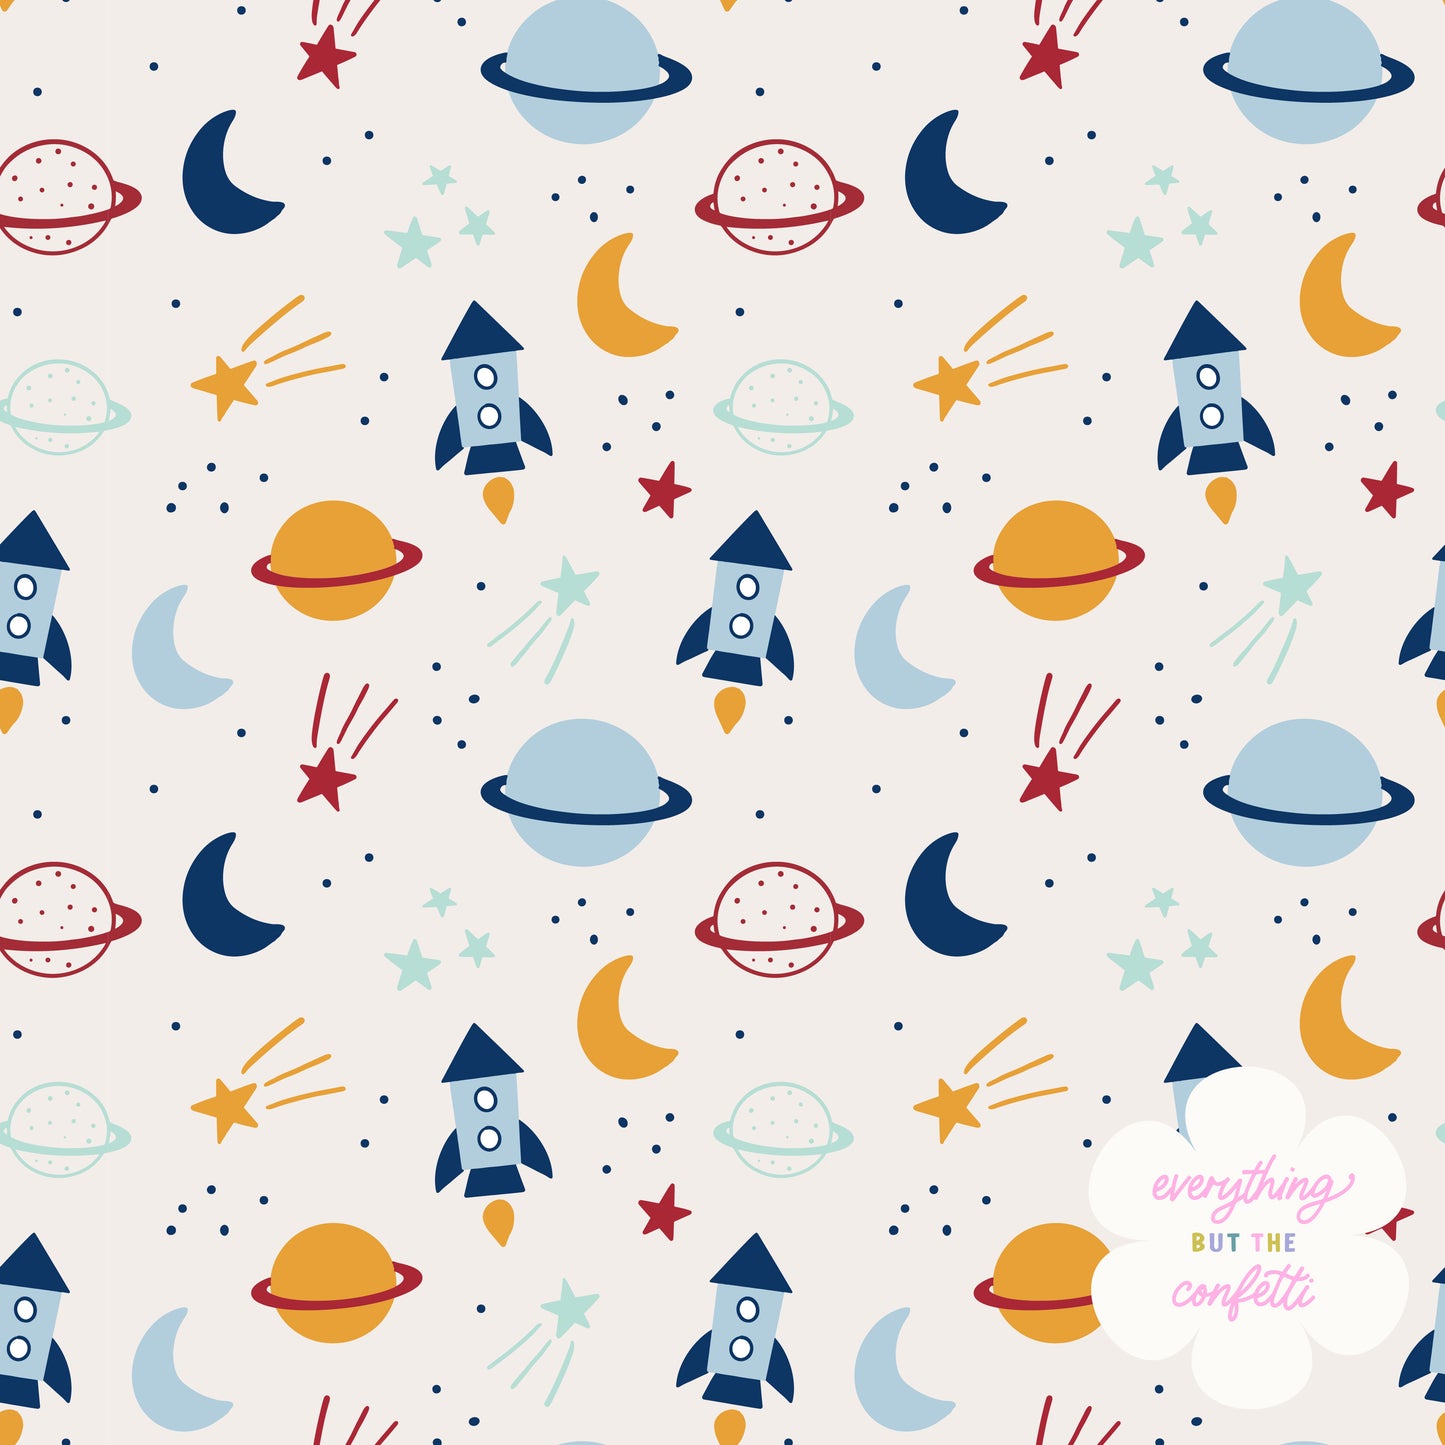 "Outer Space" Seamless Digital Pattern